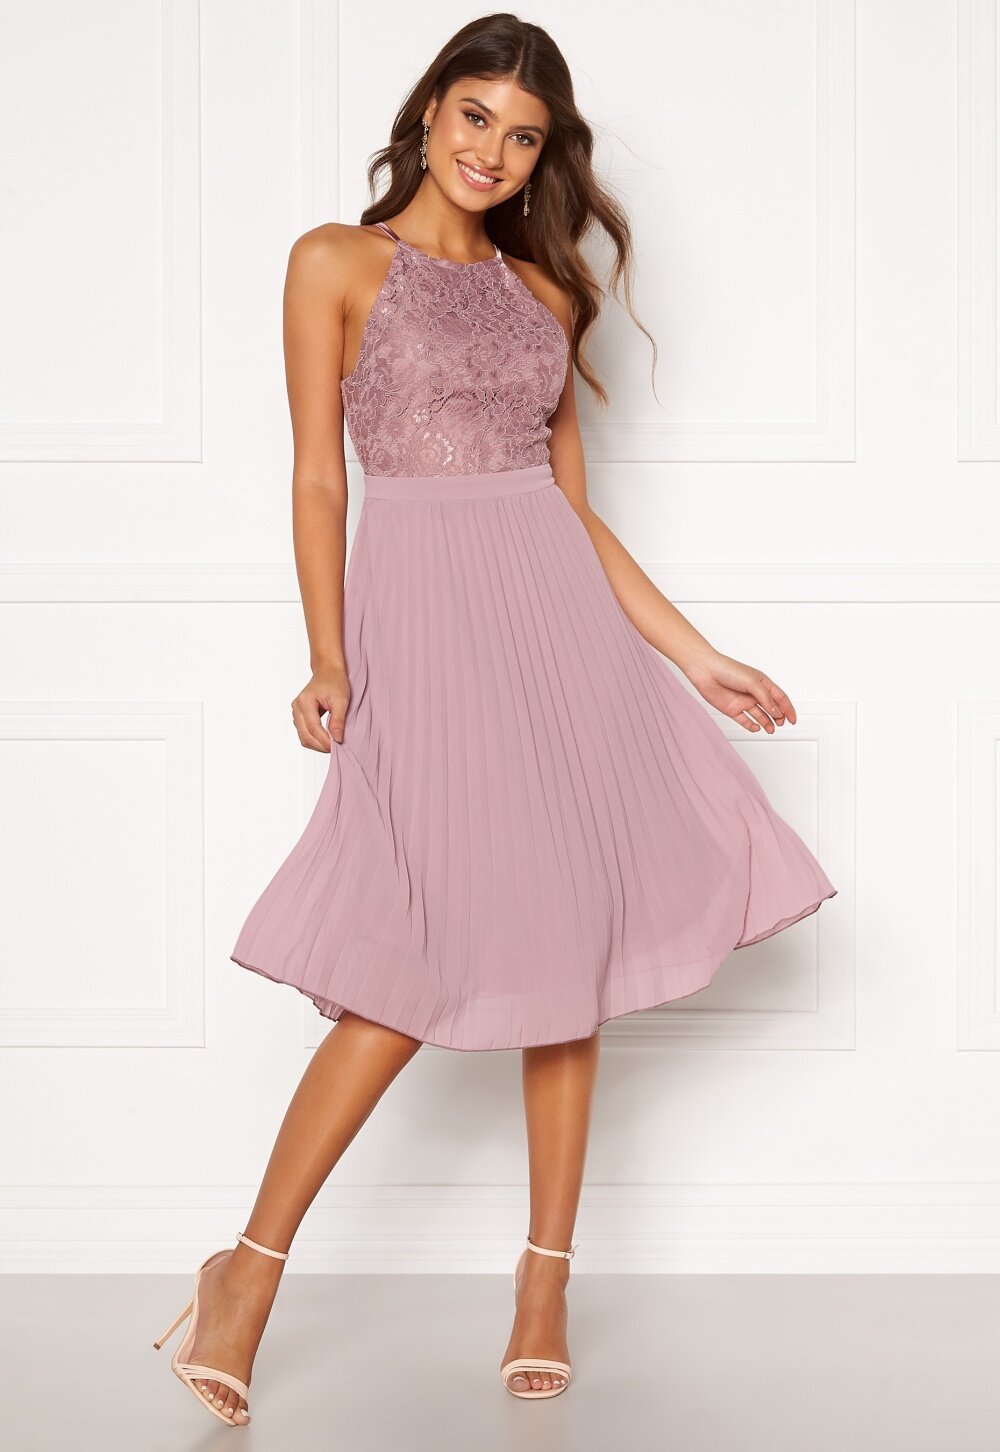 Moments New York Casia Pleated Dress Old rose